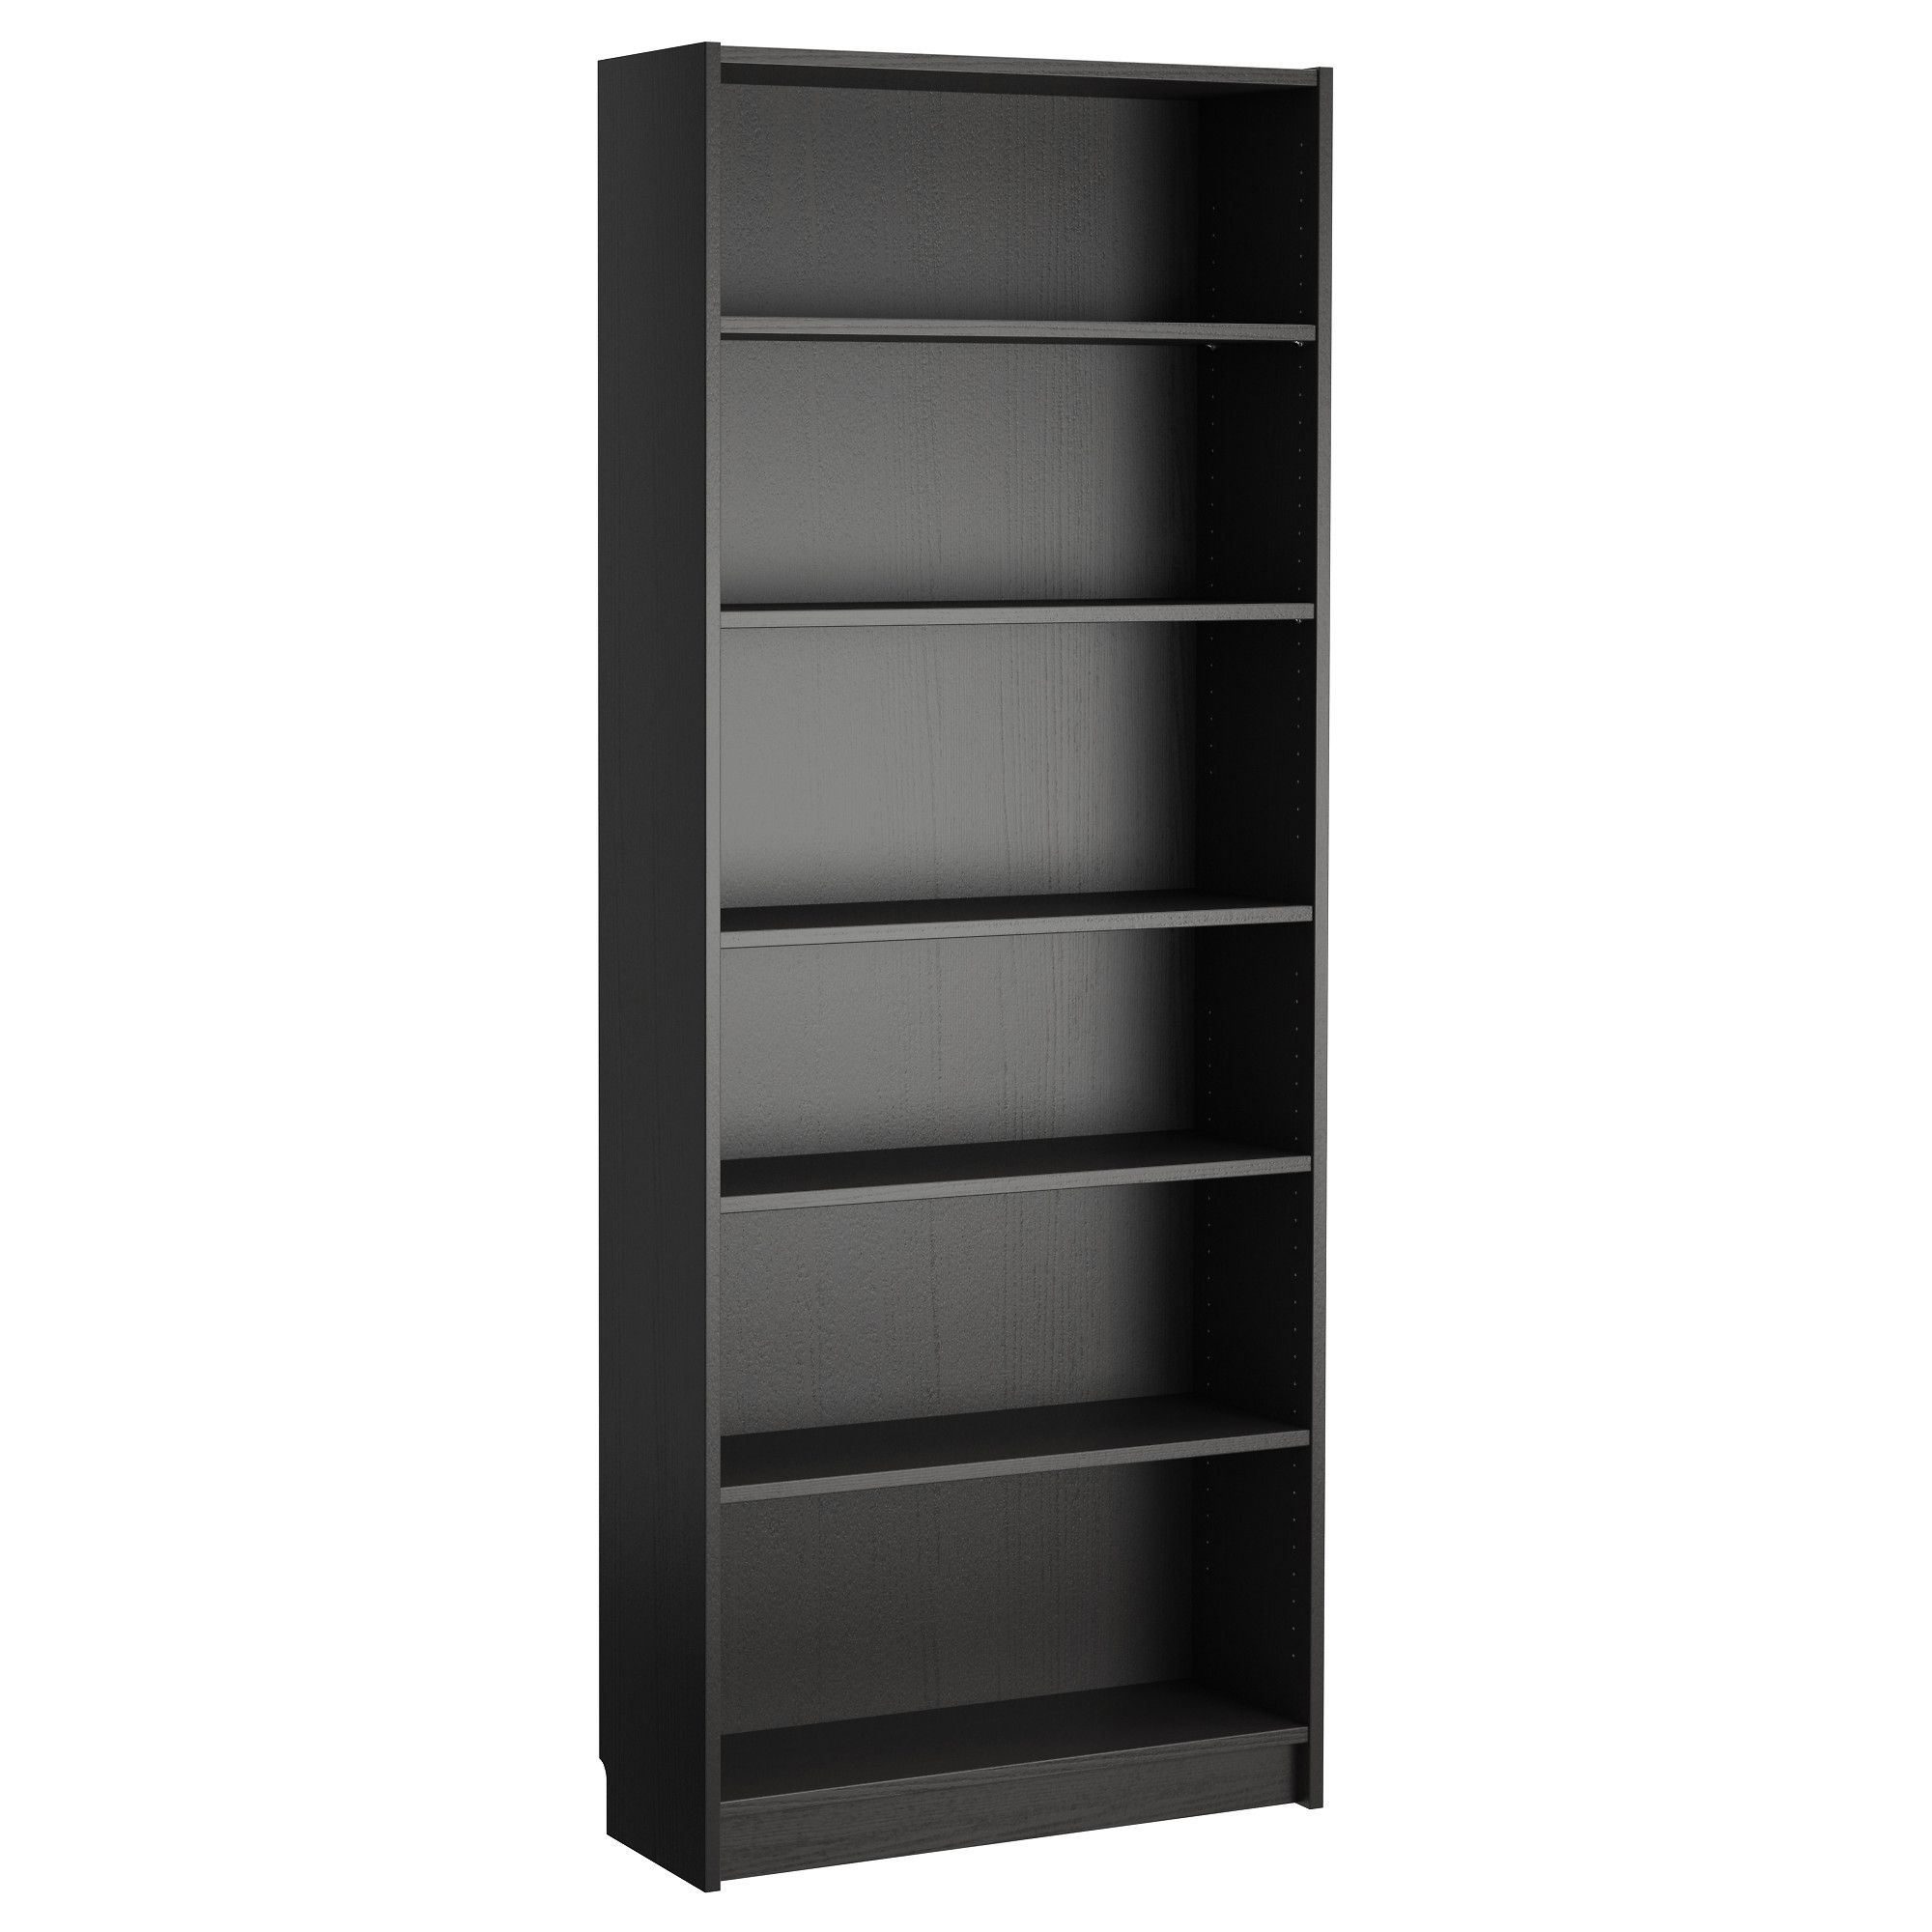 Black Bookcases With Glass Doors Pertaining To Newest Billy Bookcase – Black Brown – Ikea (View 5 of 15)